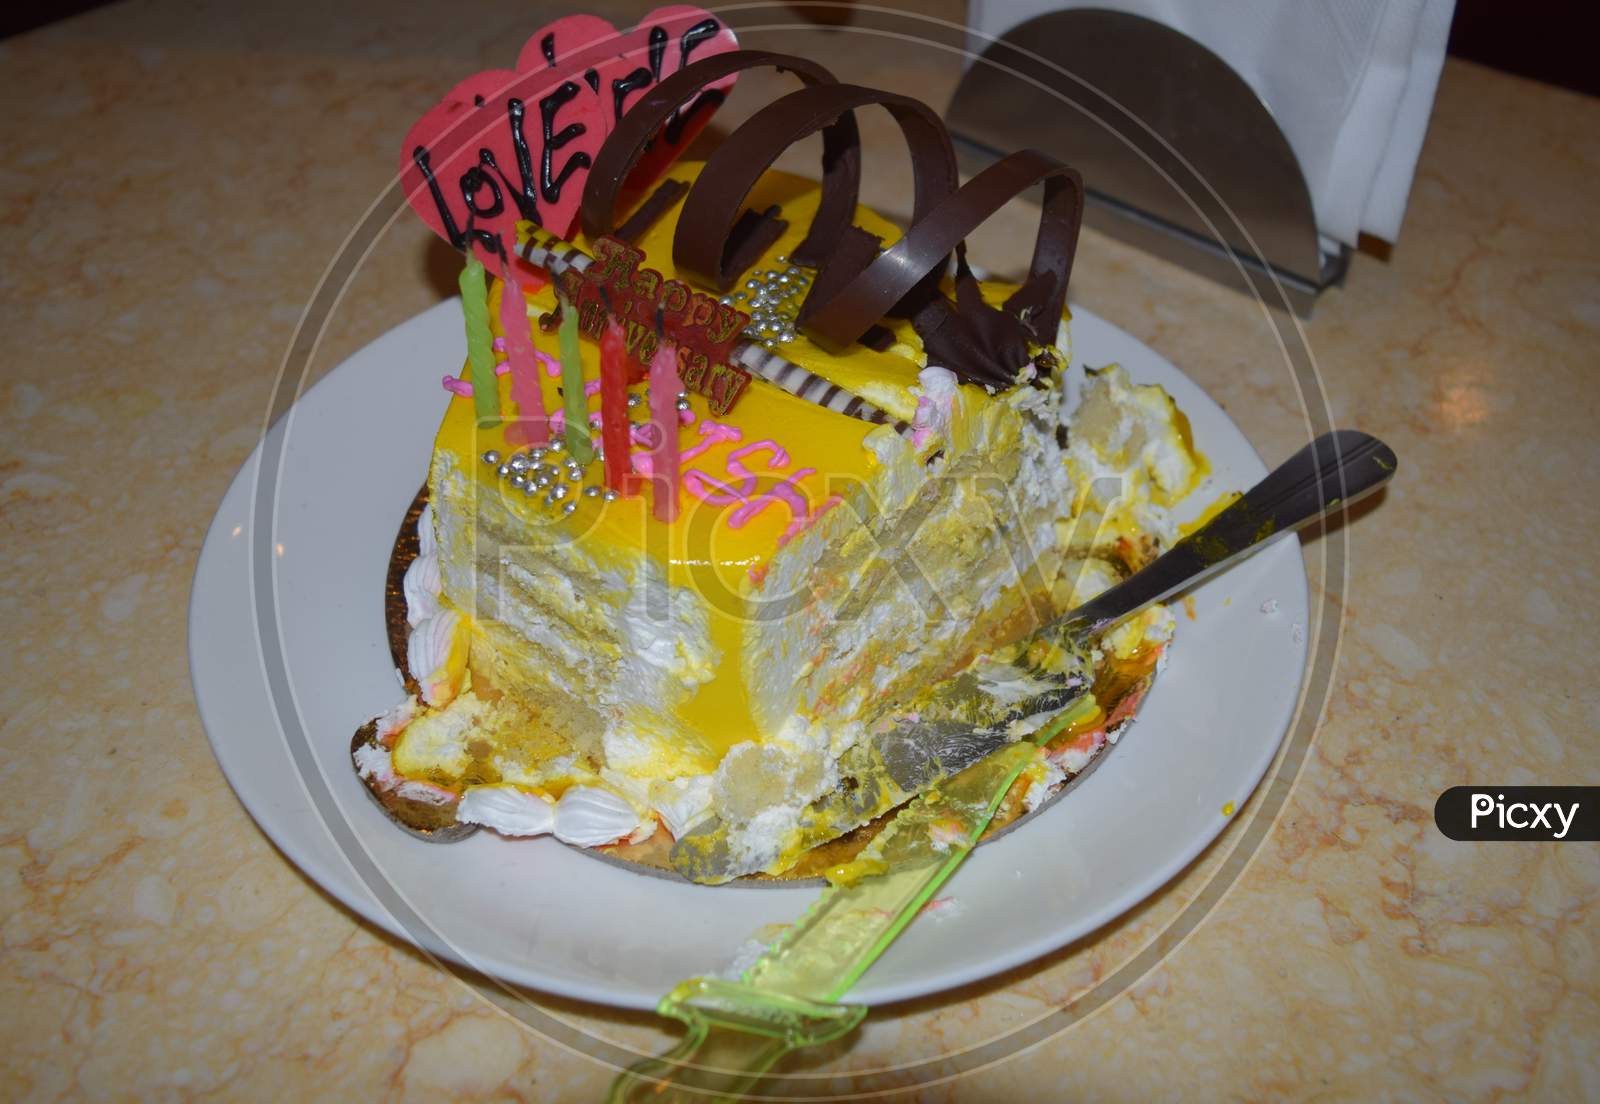 I will never regret saving money with our fake cake 😂 photo of the fake  slice where you can put real cake for the cutting photos. :  r/weddingplanning